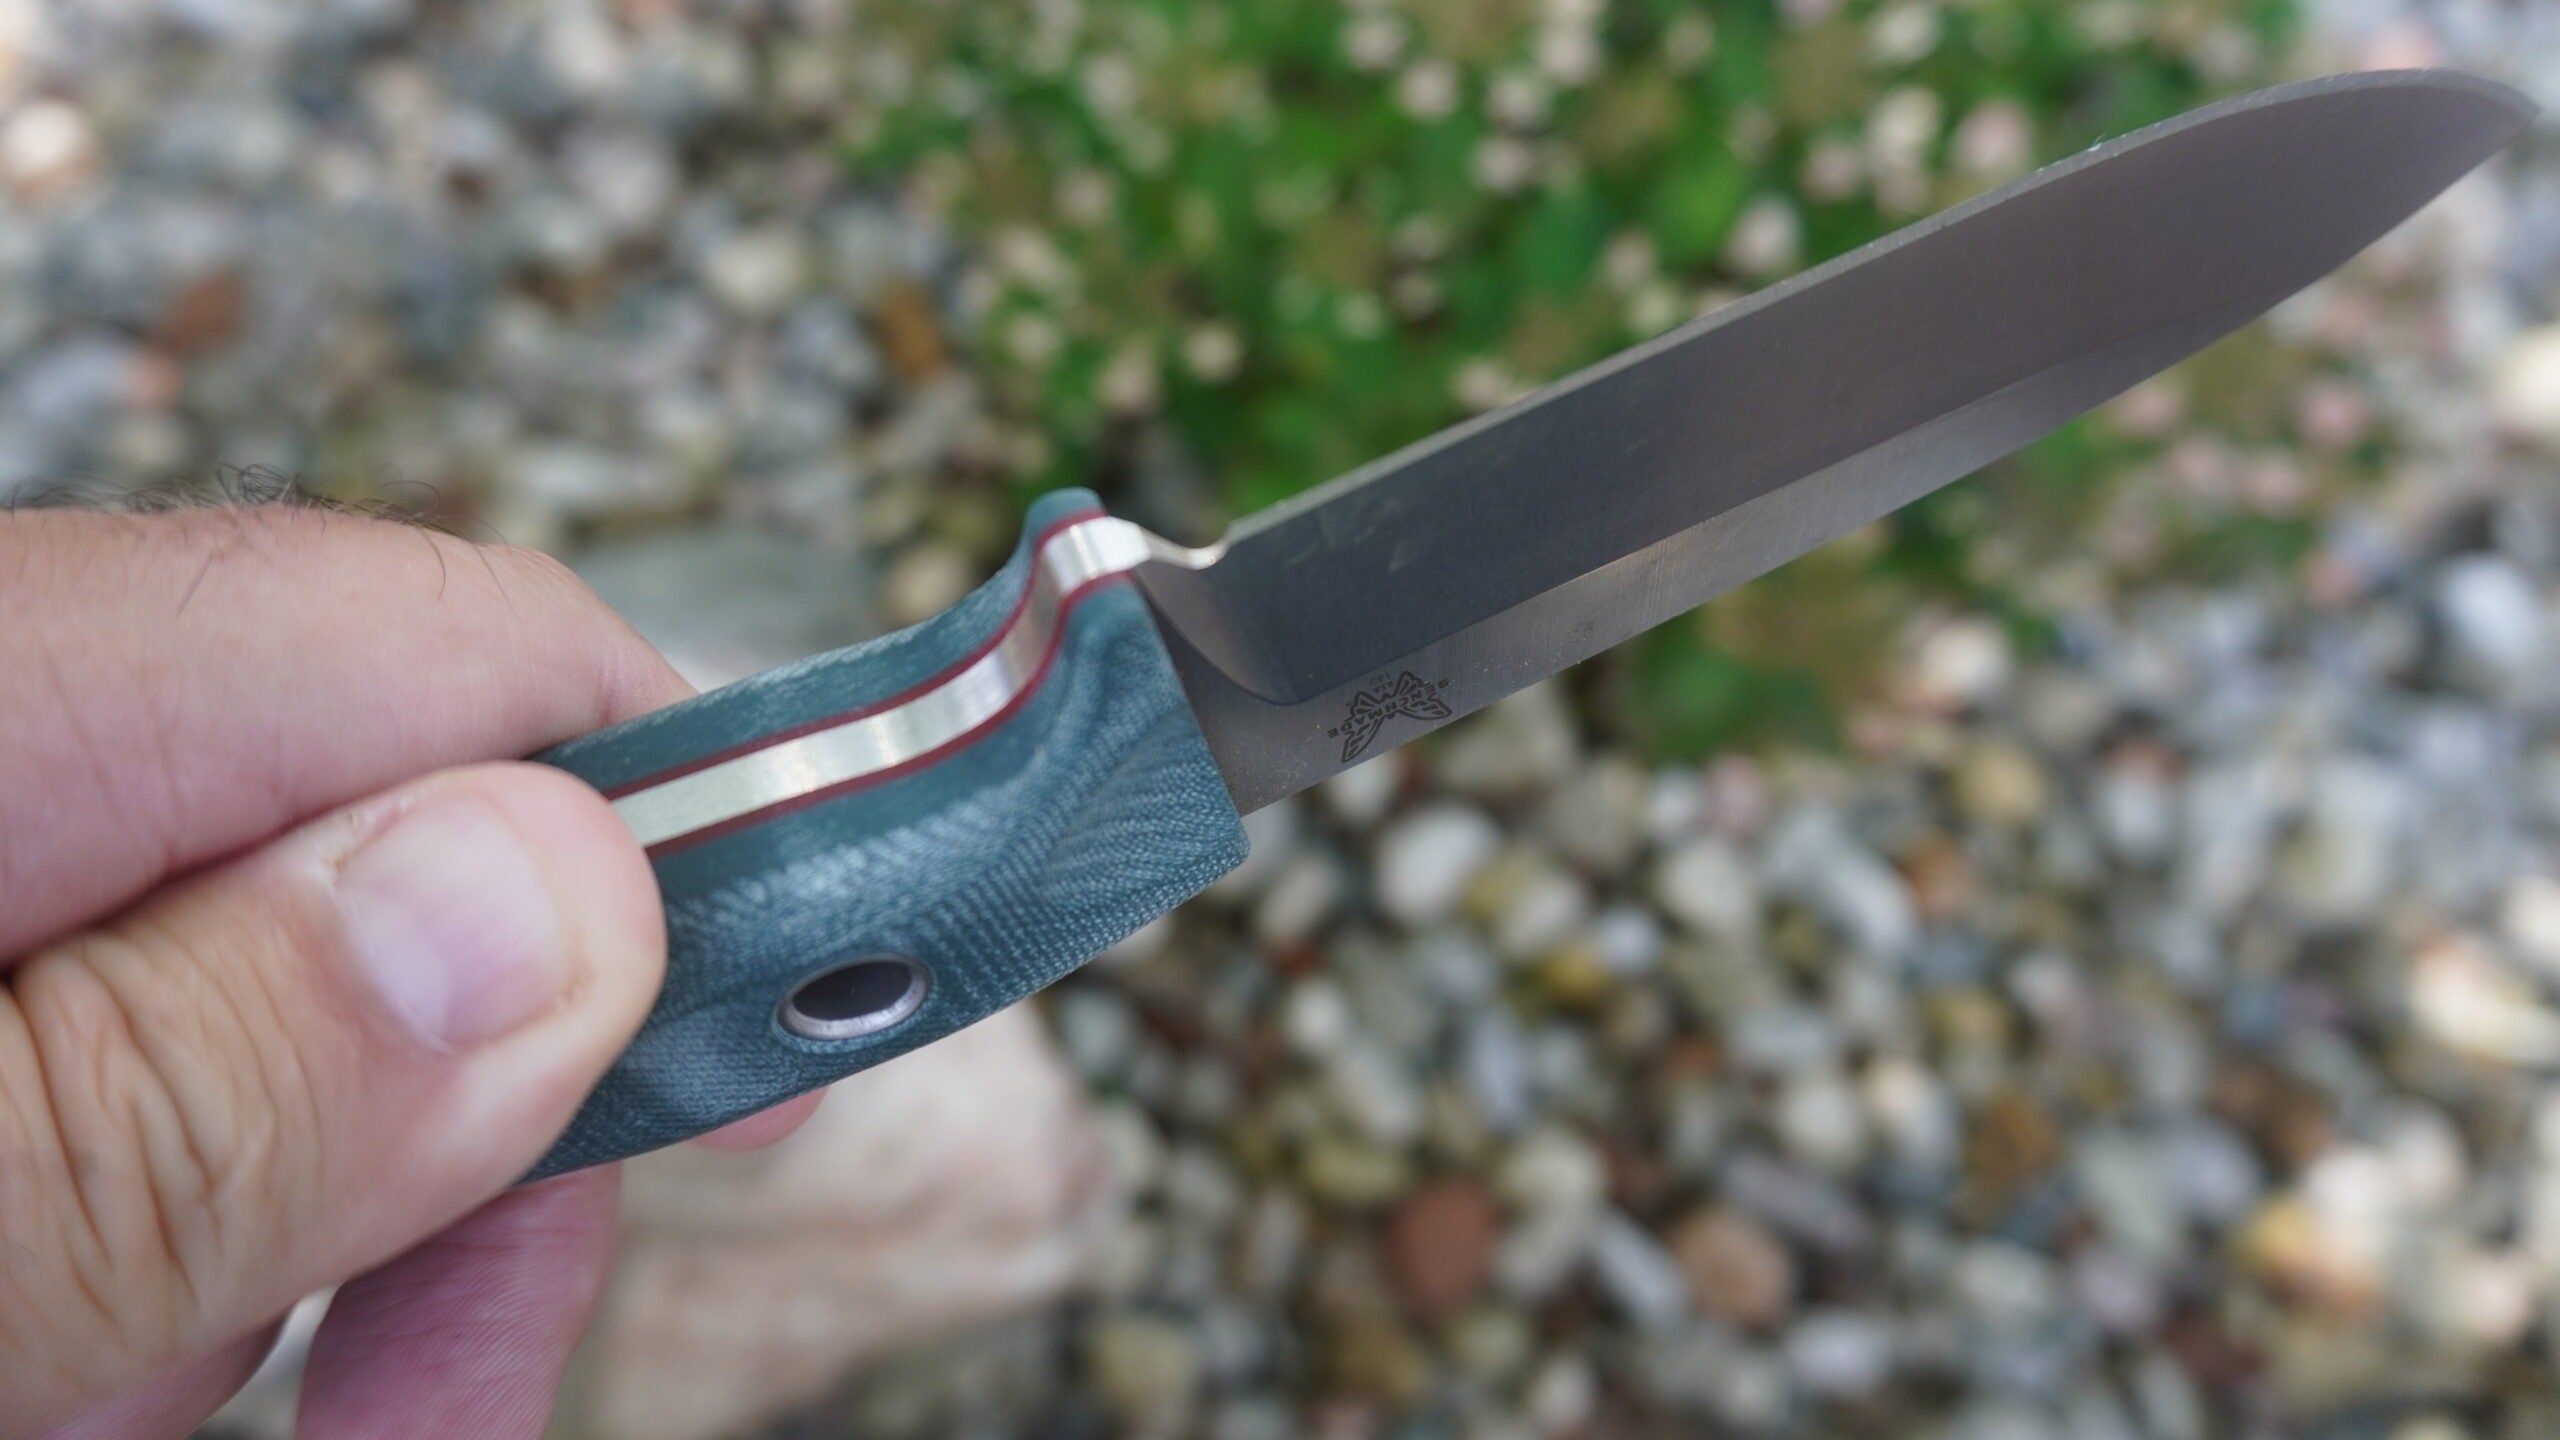 The Bushcrafter's beefy design makes it ideal for camping. Travis Smola